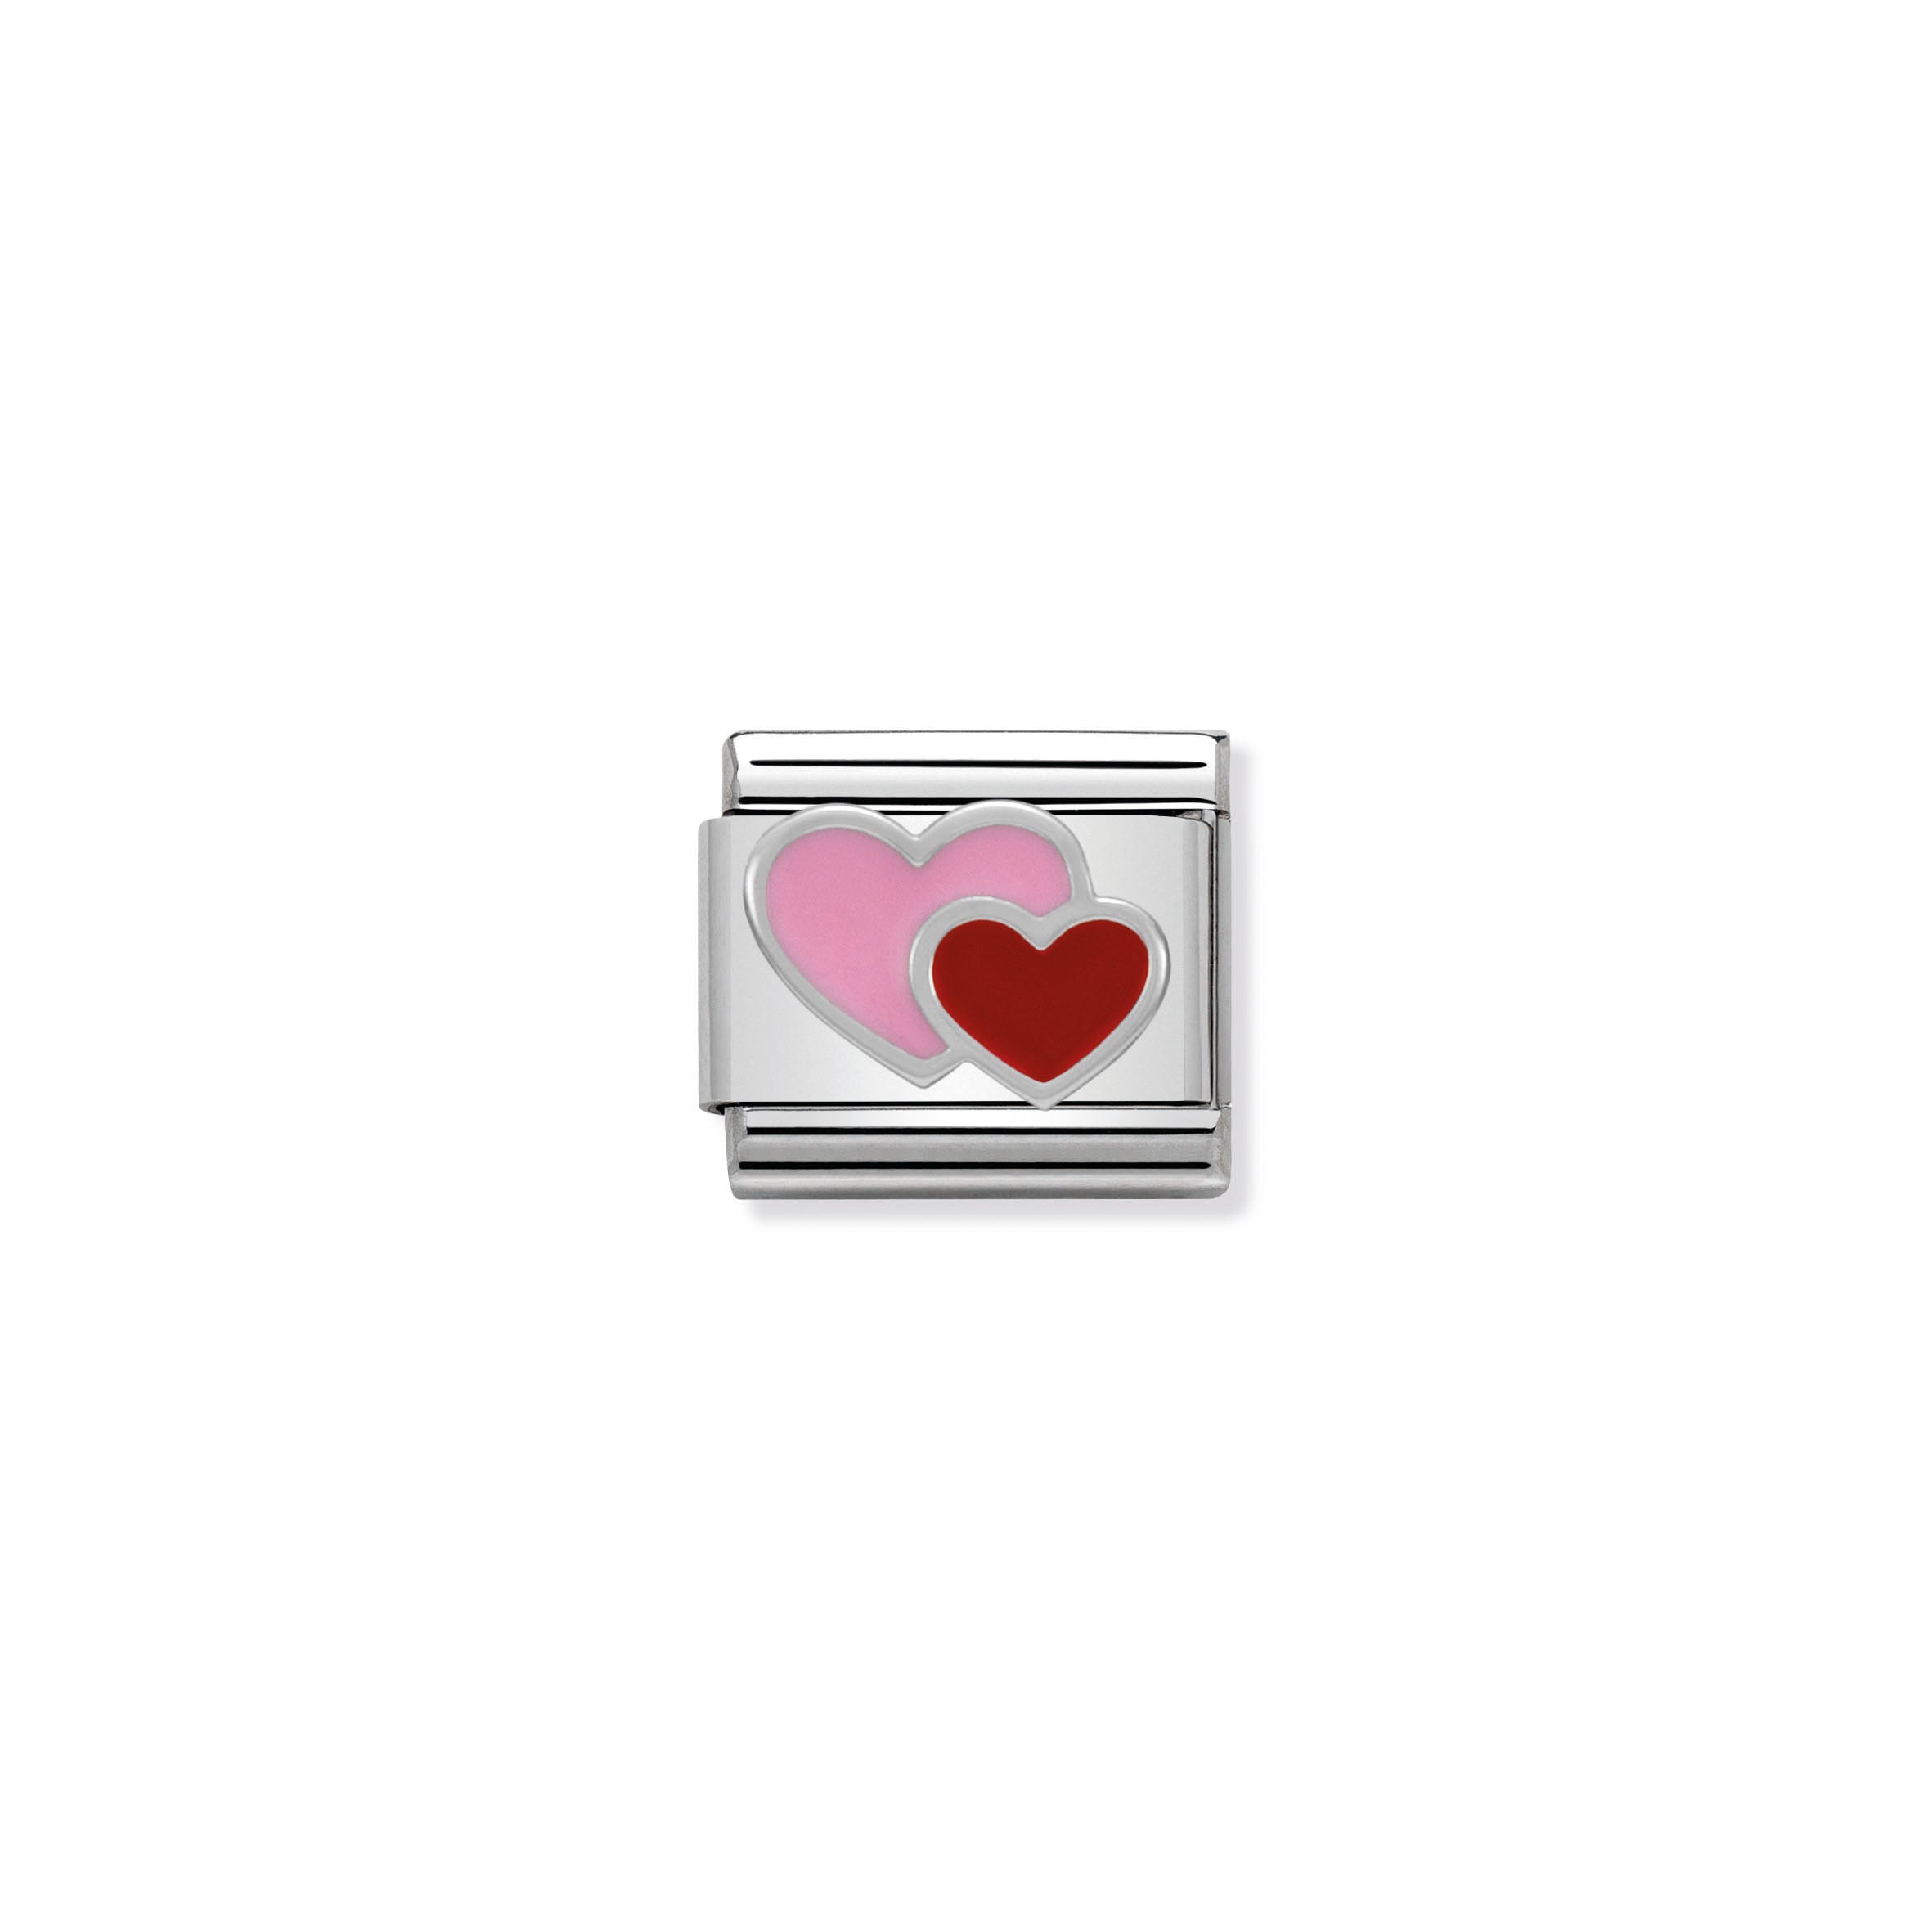 NOMINATION - Composable 330202 16 Classic SYMBOLS st/st, enamel & silver 925 (Pink & Red Double Heart)